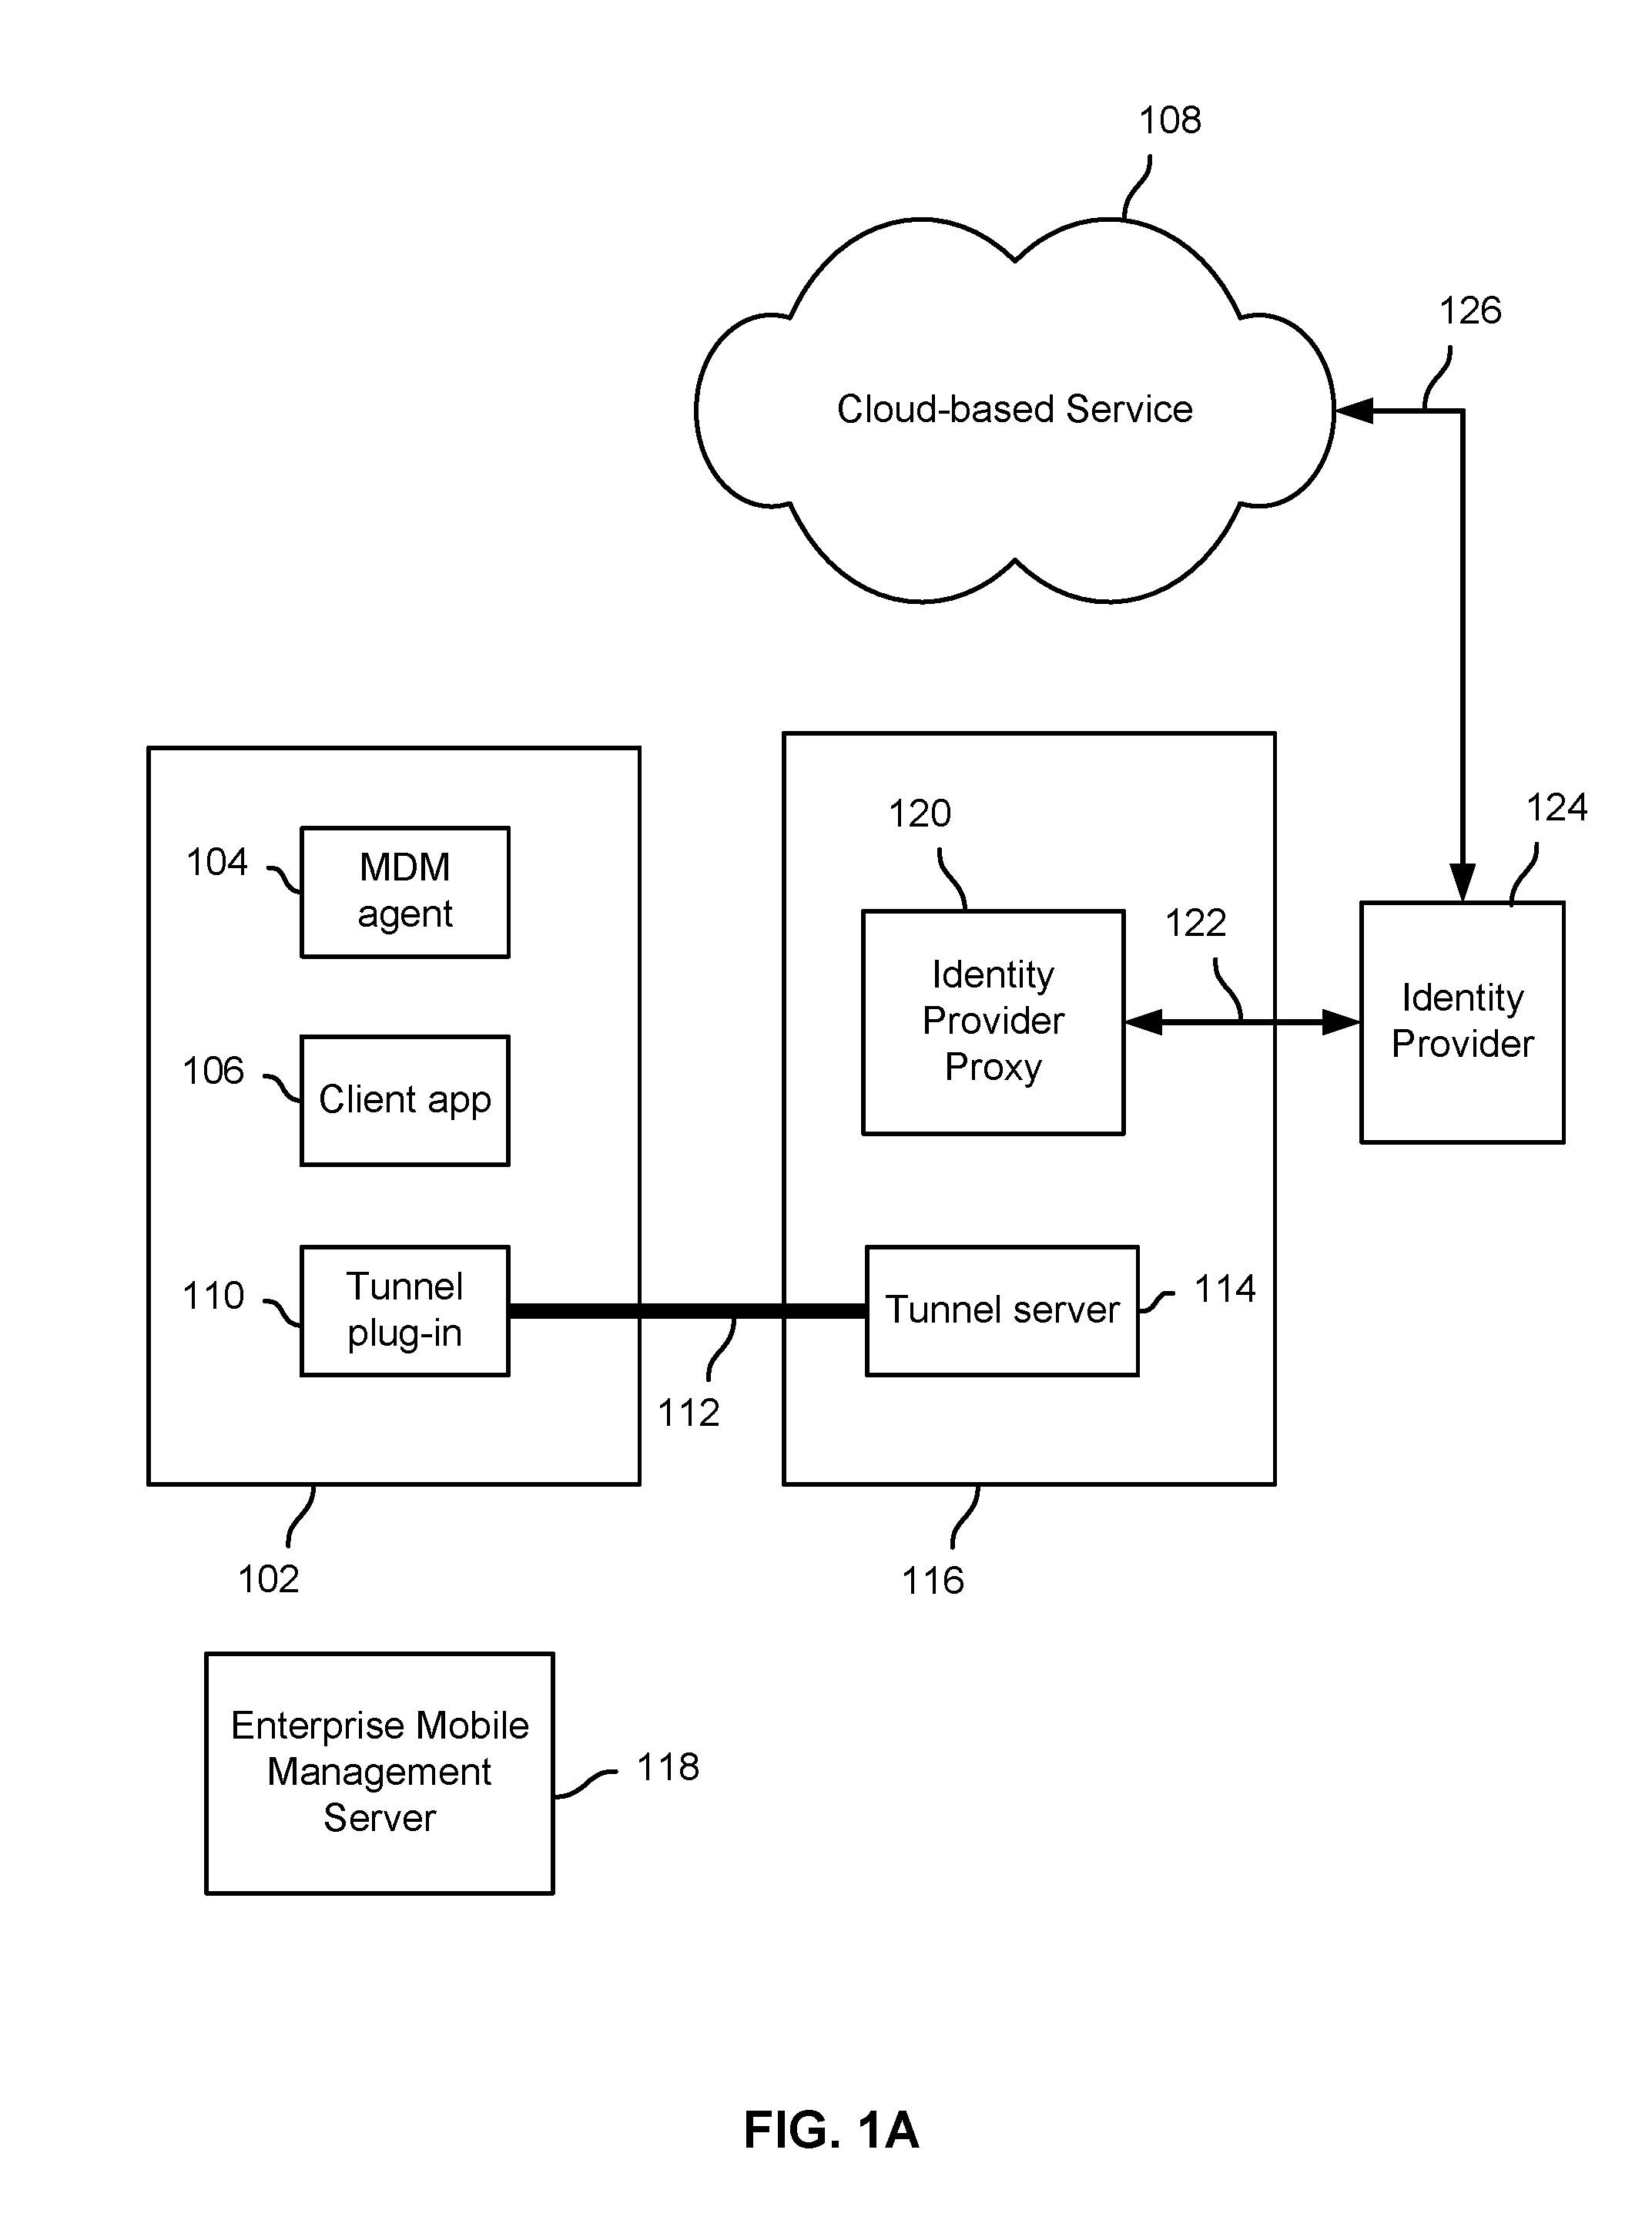 Identity proxy to provide access control and single sign on